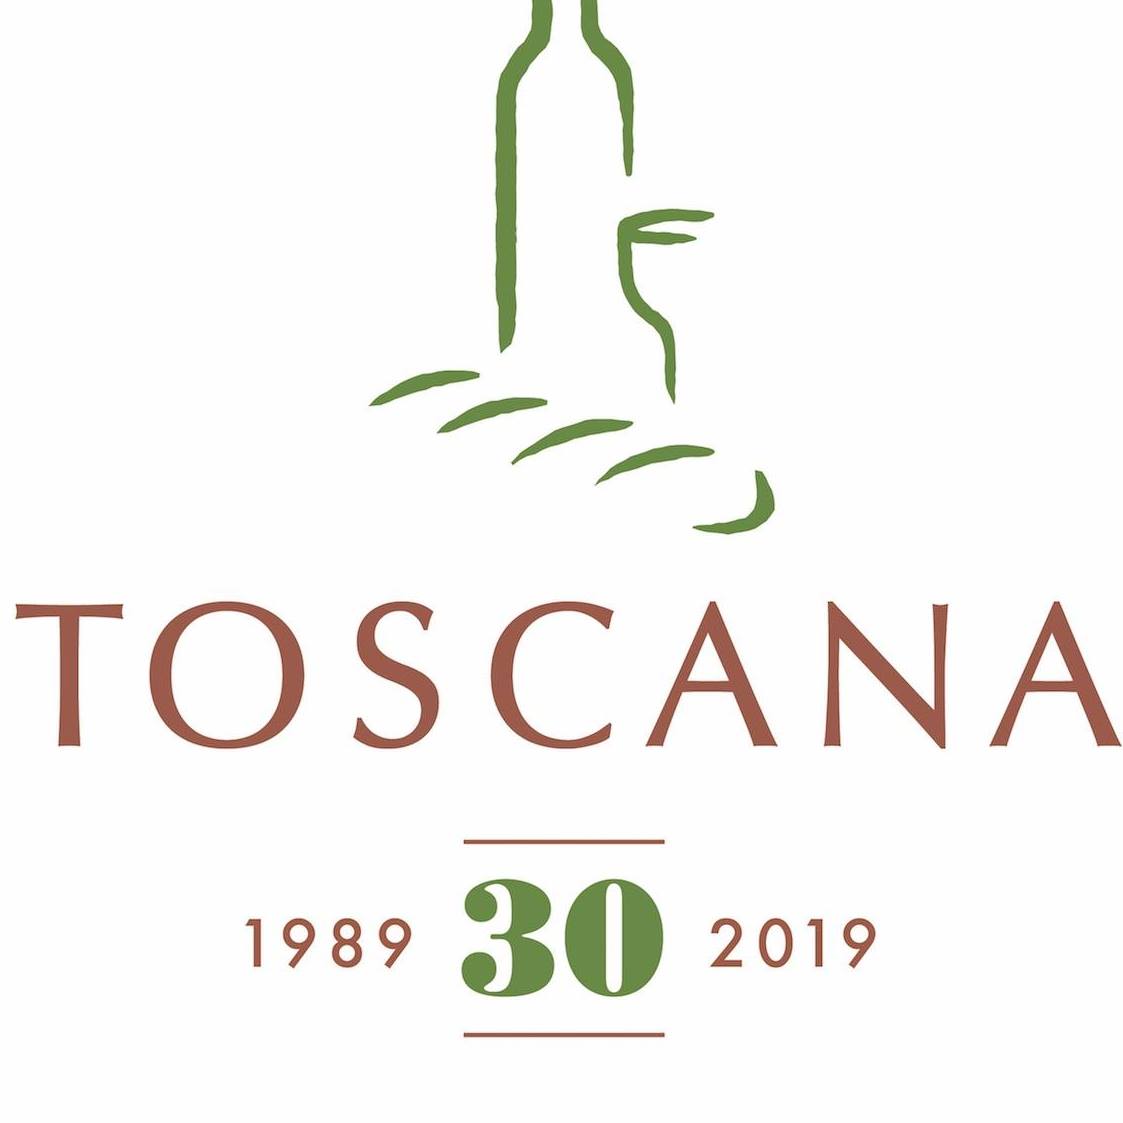 Toscana Brentwood